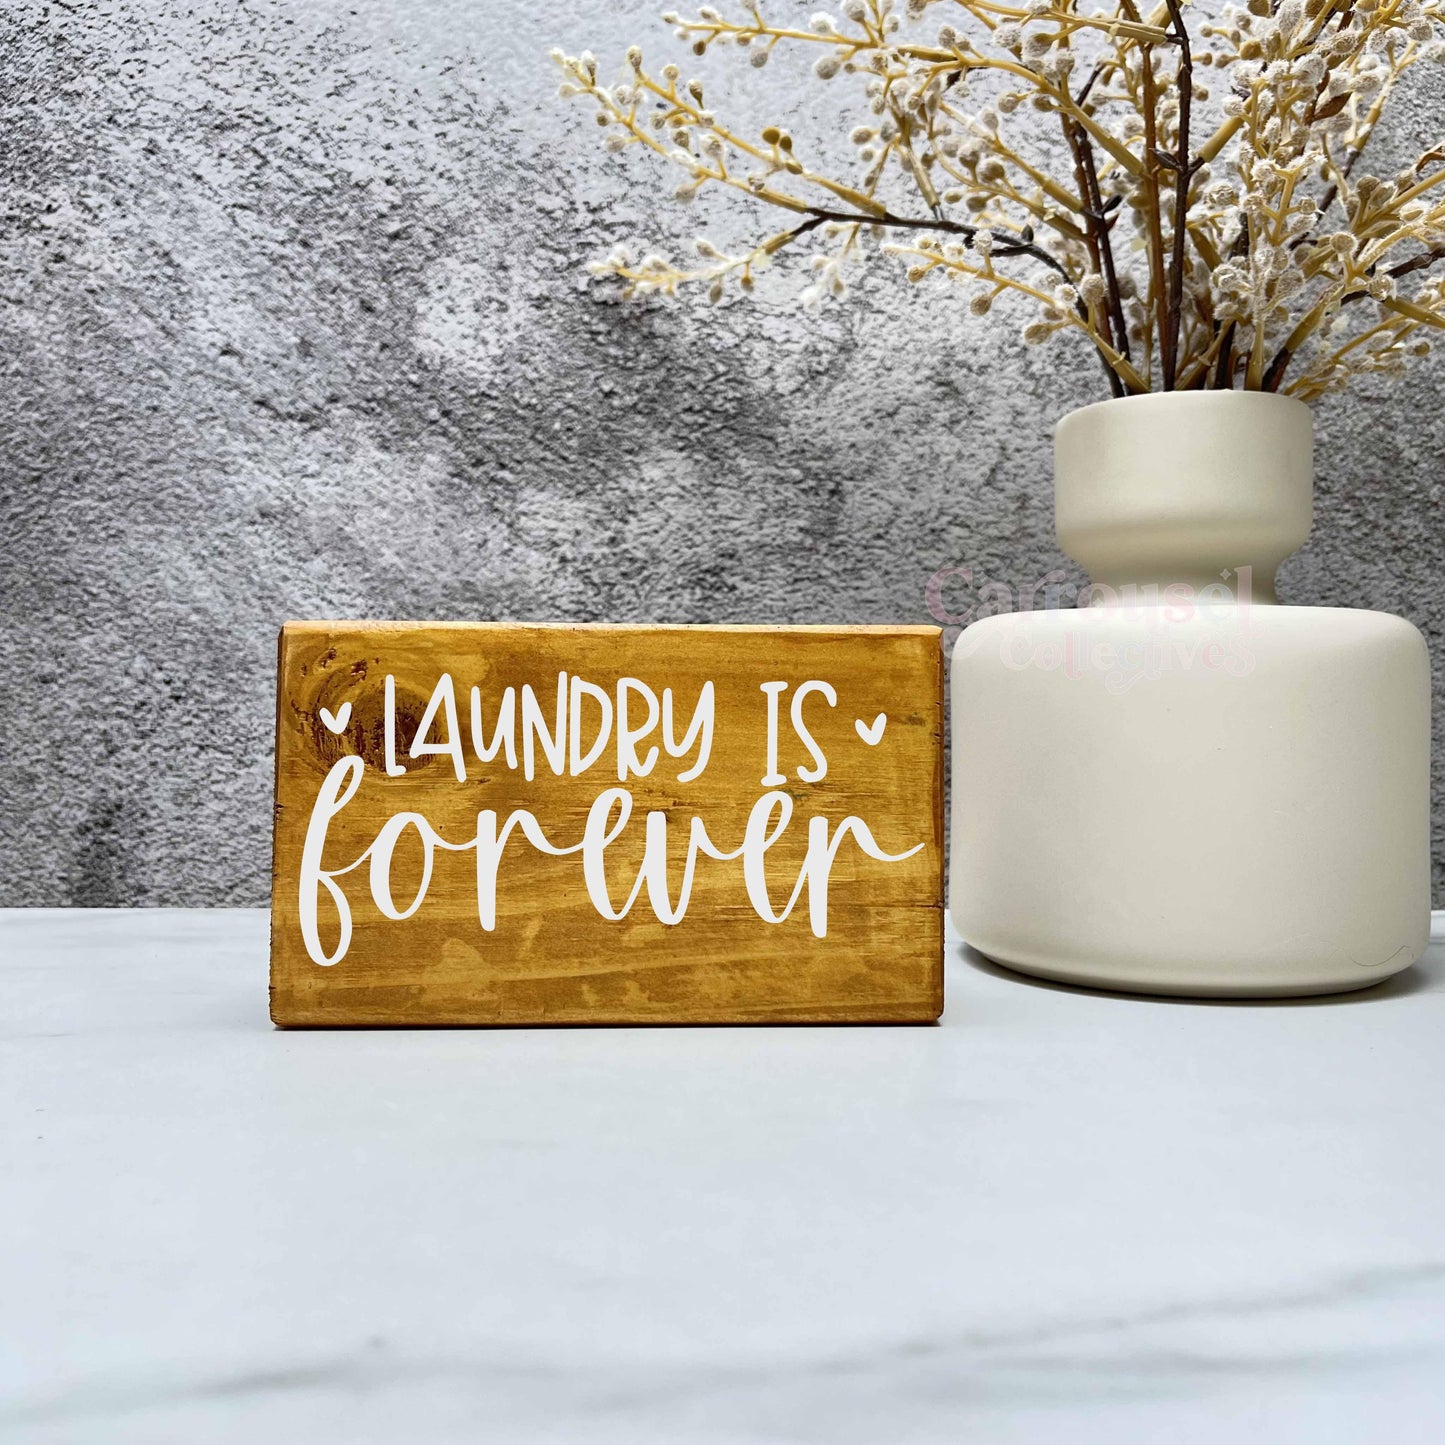 Laundry is forever, laundry wood sign, laundry decor, home decor